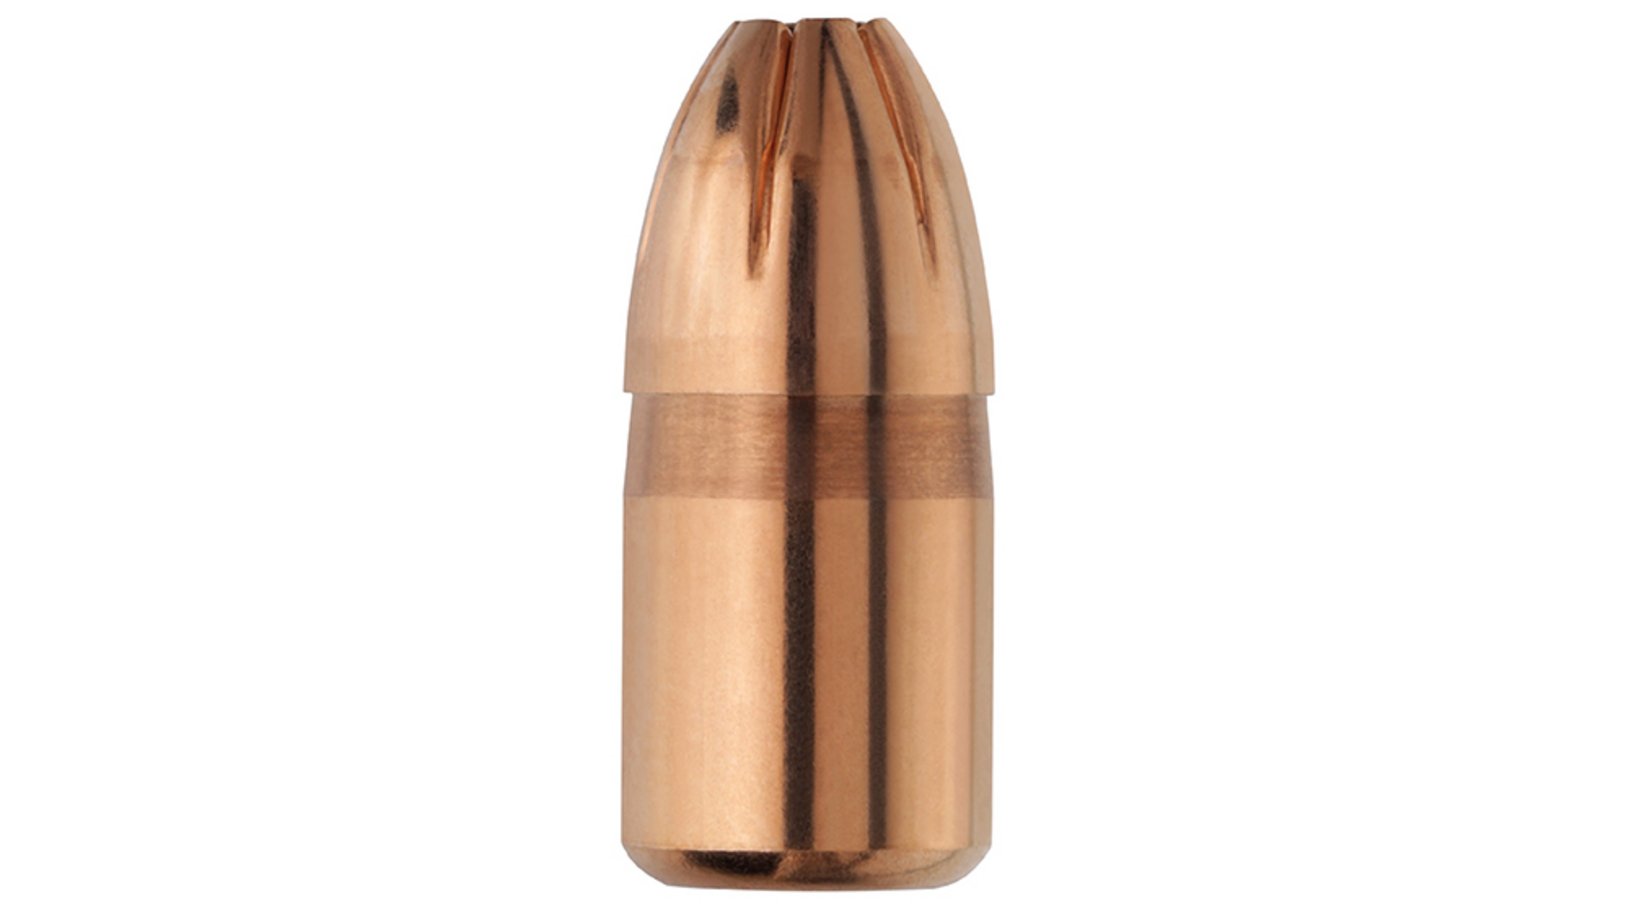 Frontview of ammunition of GECO HEXAGON 11,7g